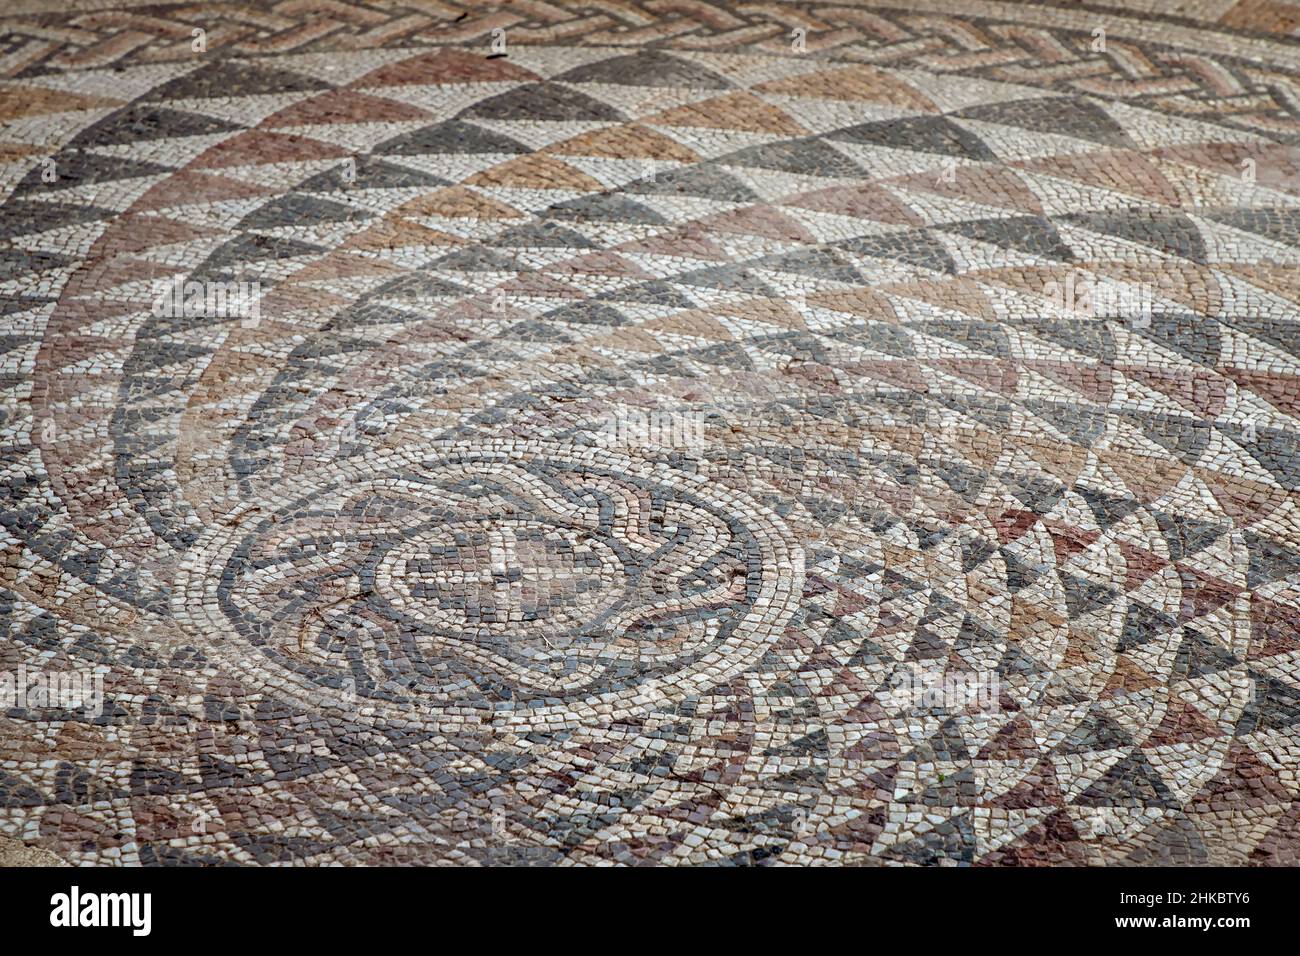 Gamzigrad, Serbia - The preserved mosaic of the Roman Emperor Galerius Maximianus palace from the late 3rd century named FELIX ROMULIANA Stock Photo